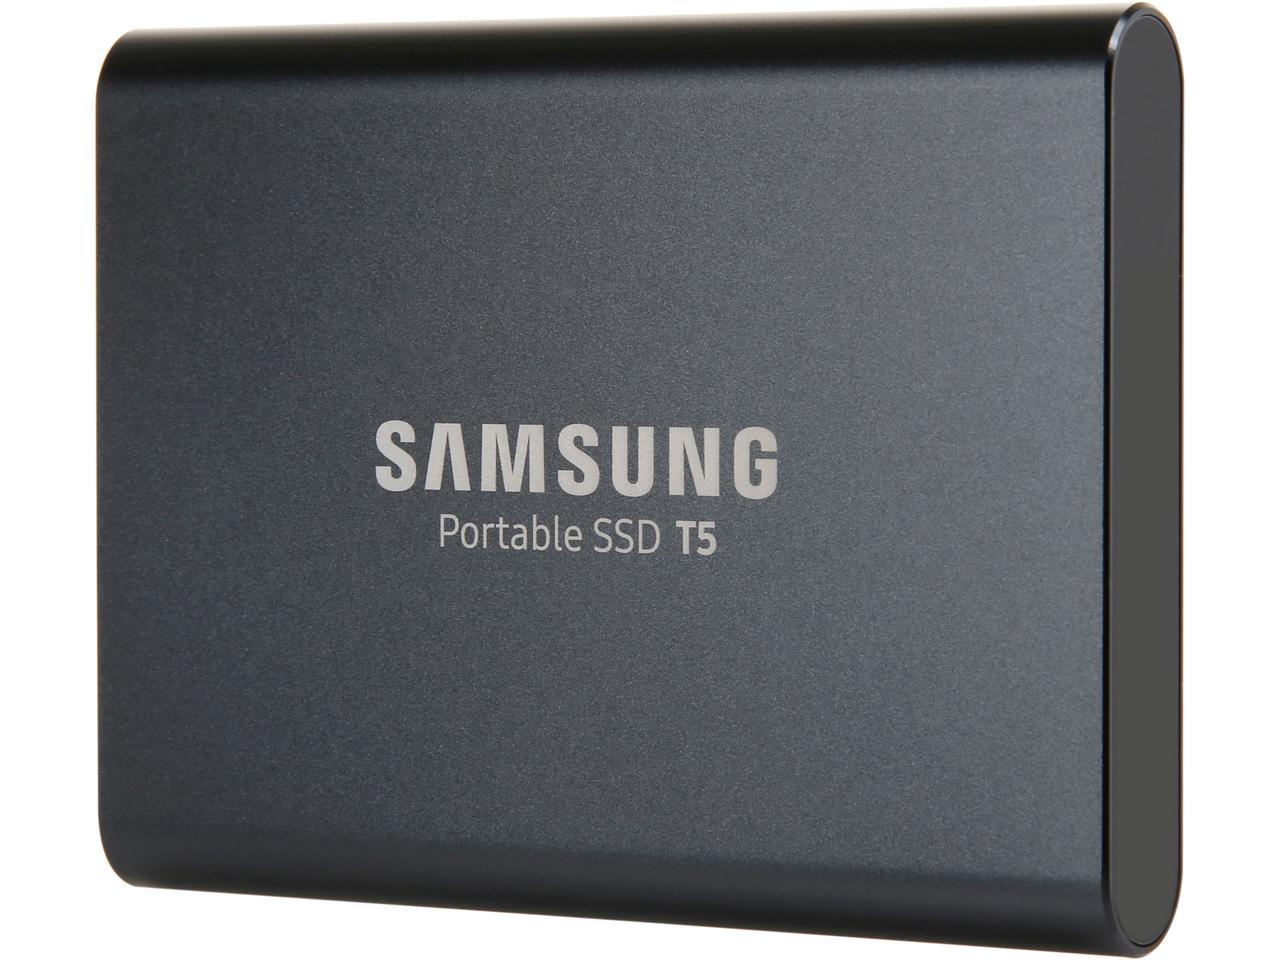 SAMSUNG T5 Portable SSD 1TB - Up to 540 MB/s - USB 3.1 External SSD $89.99 + Free Shipping